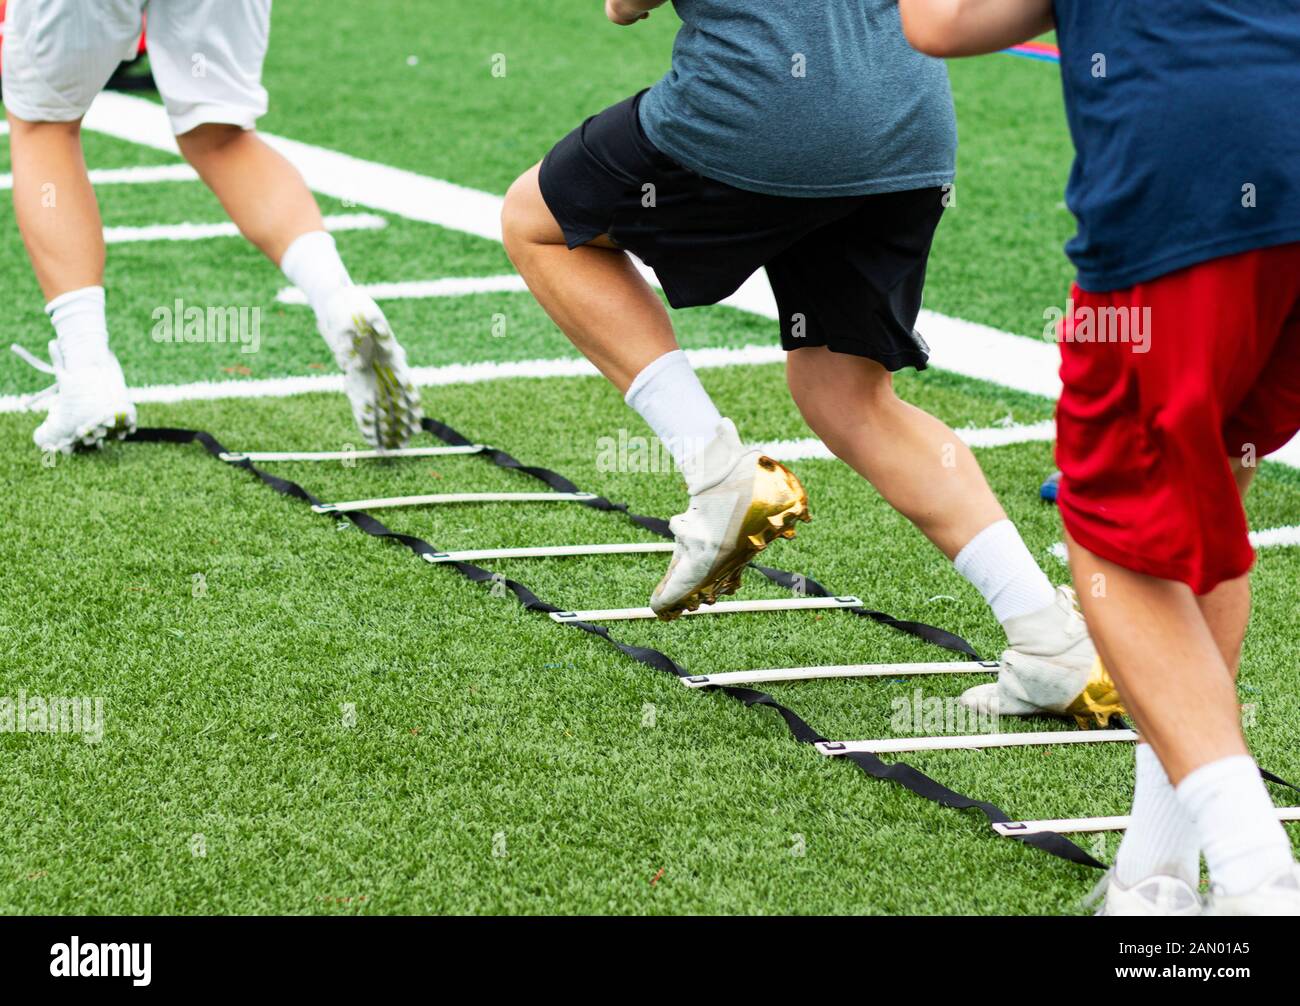 An agility ladder is on a green turf field with three young boys in cleats running through each leg. Stock Photo